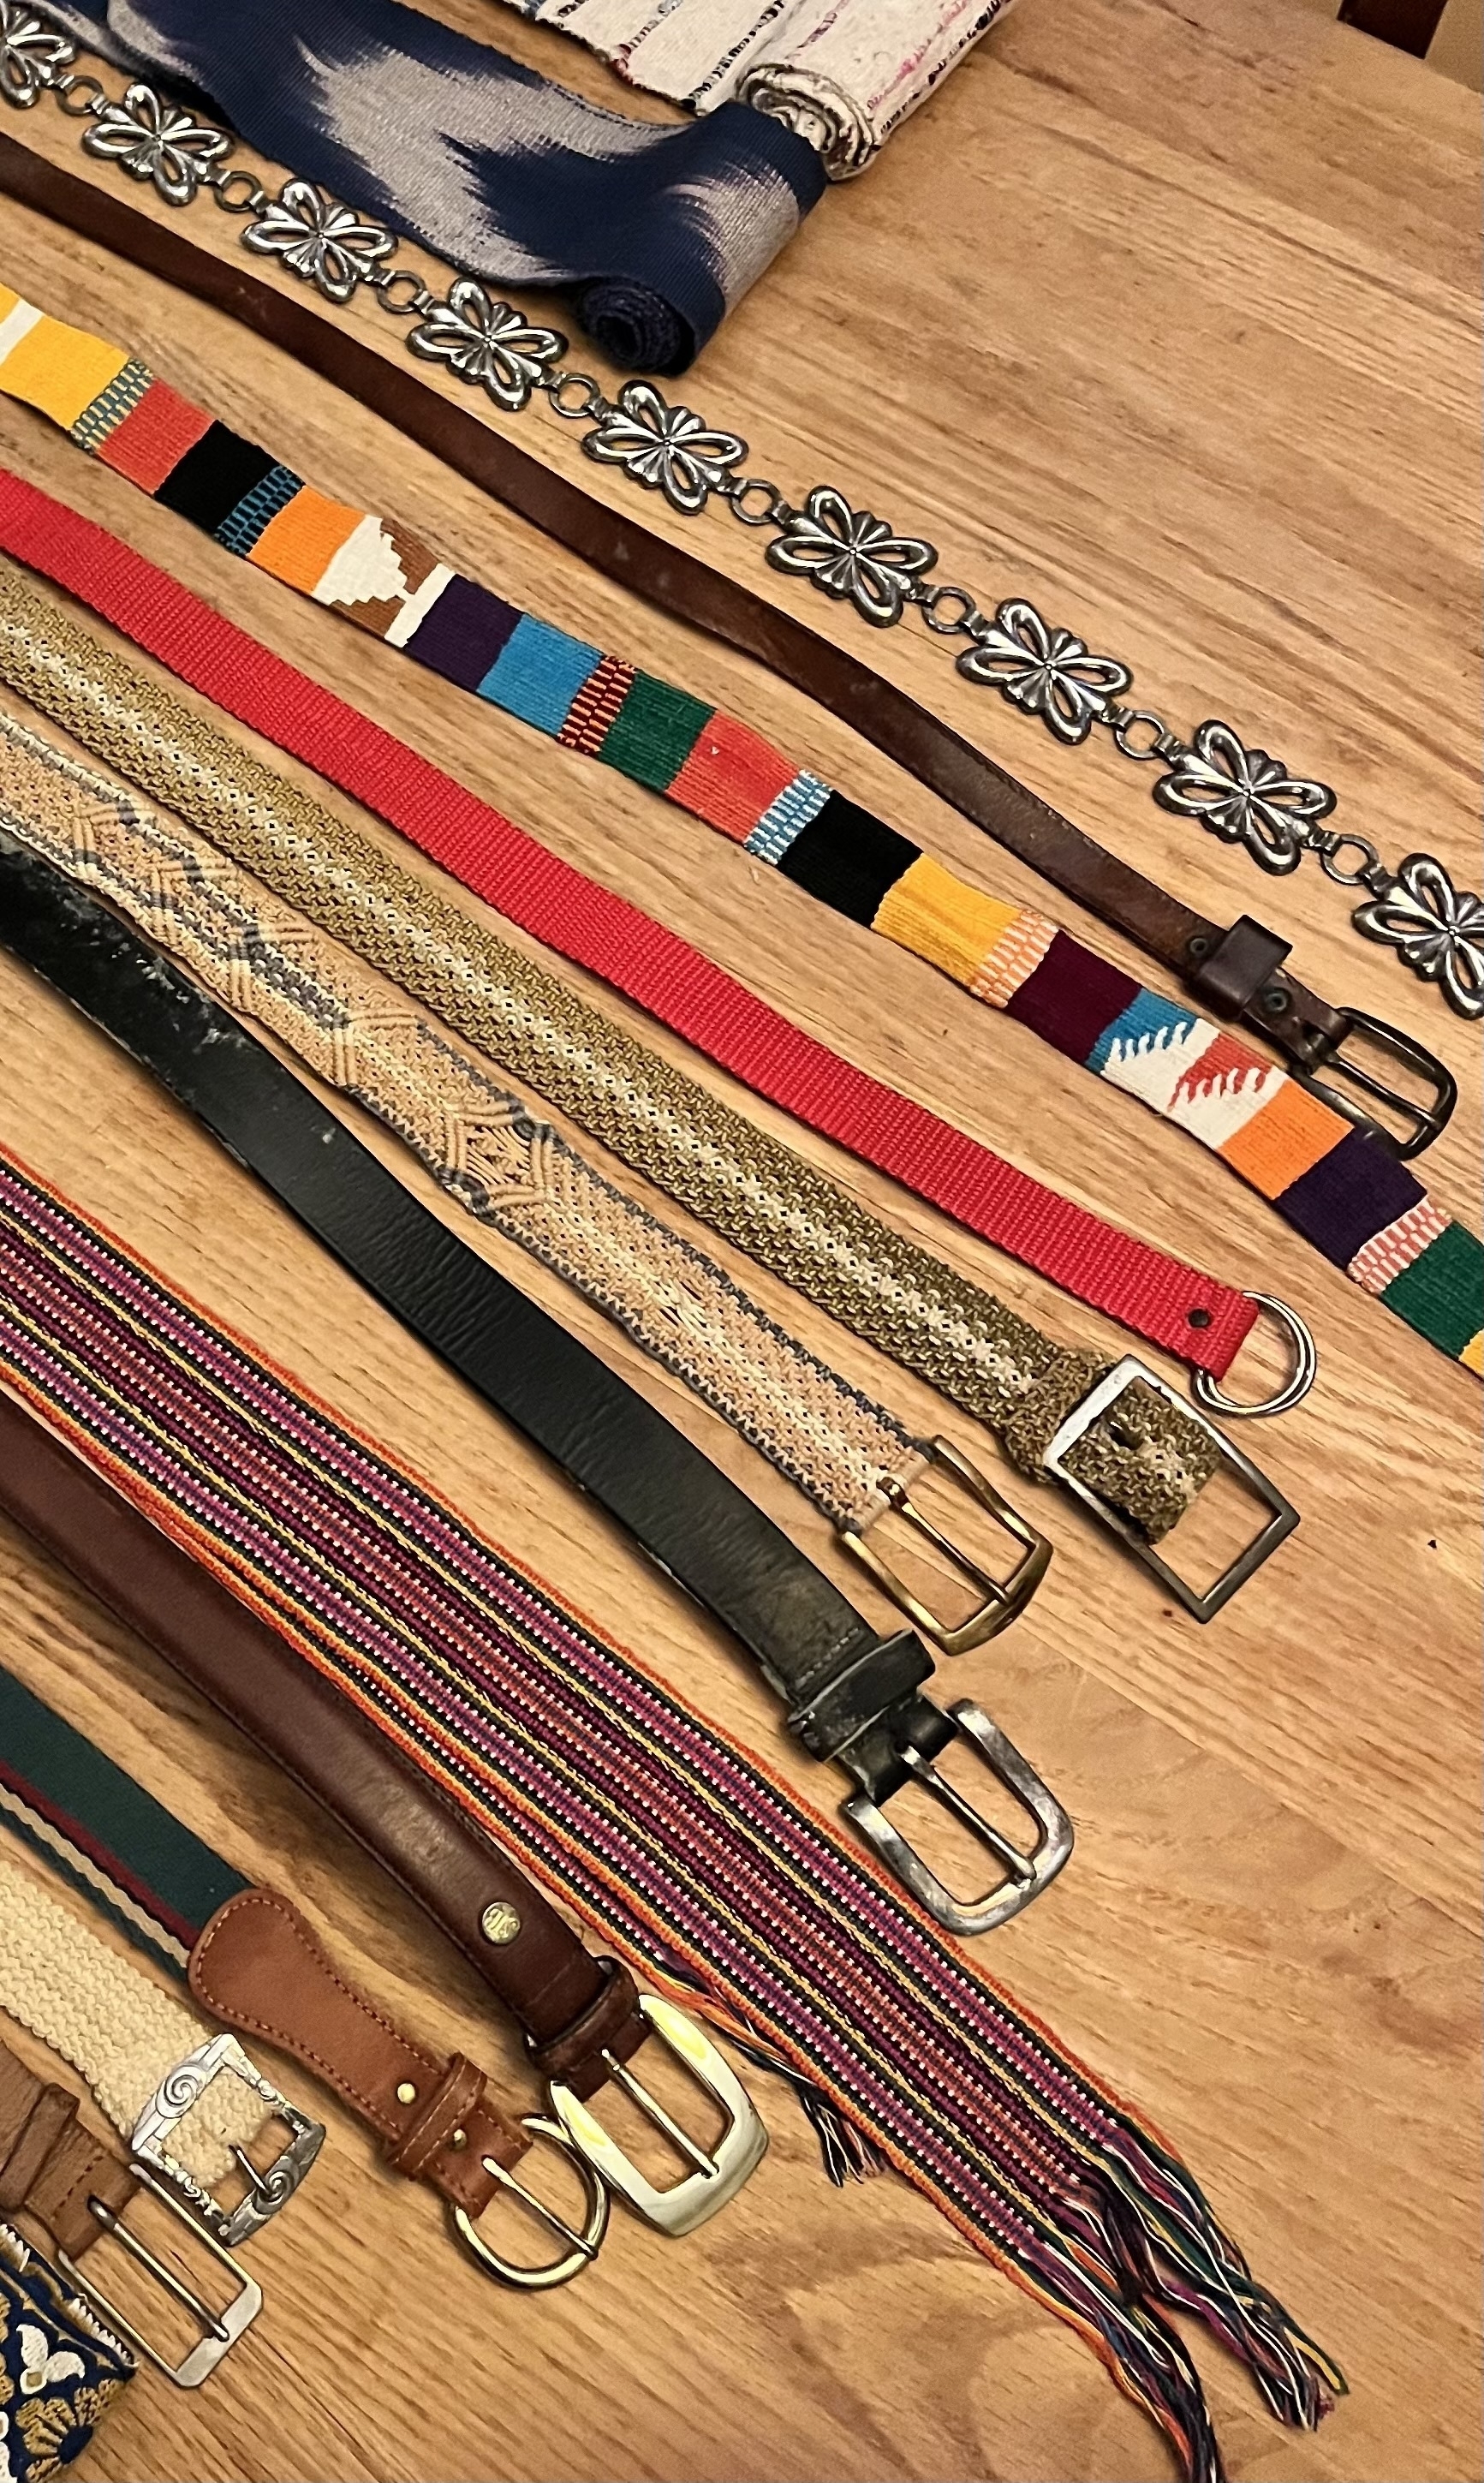 Colorful belts on an oak table running diagonally in the frame